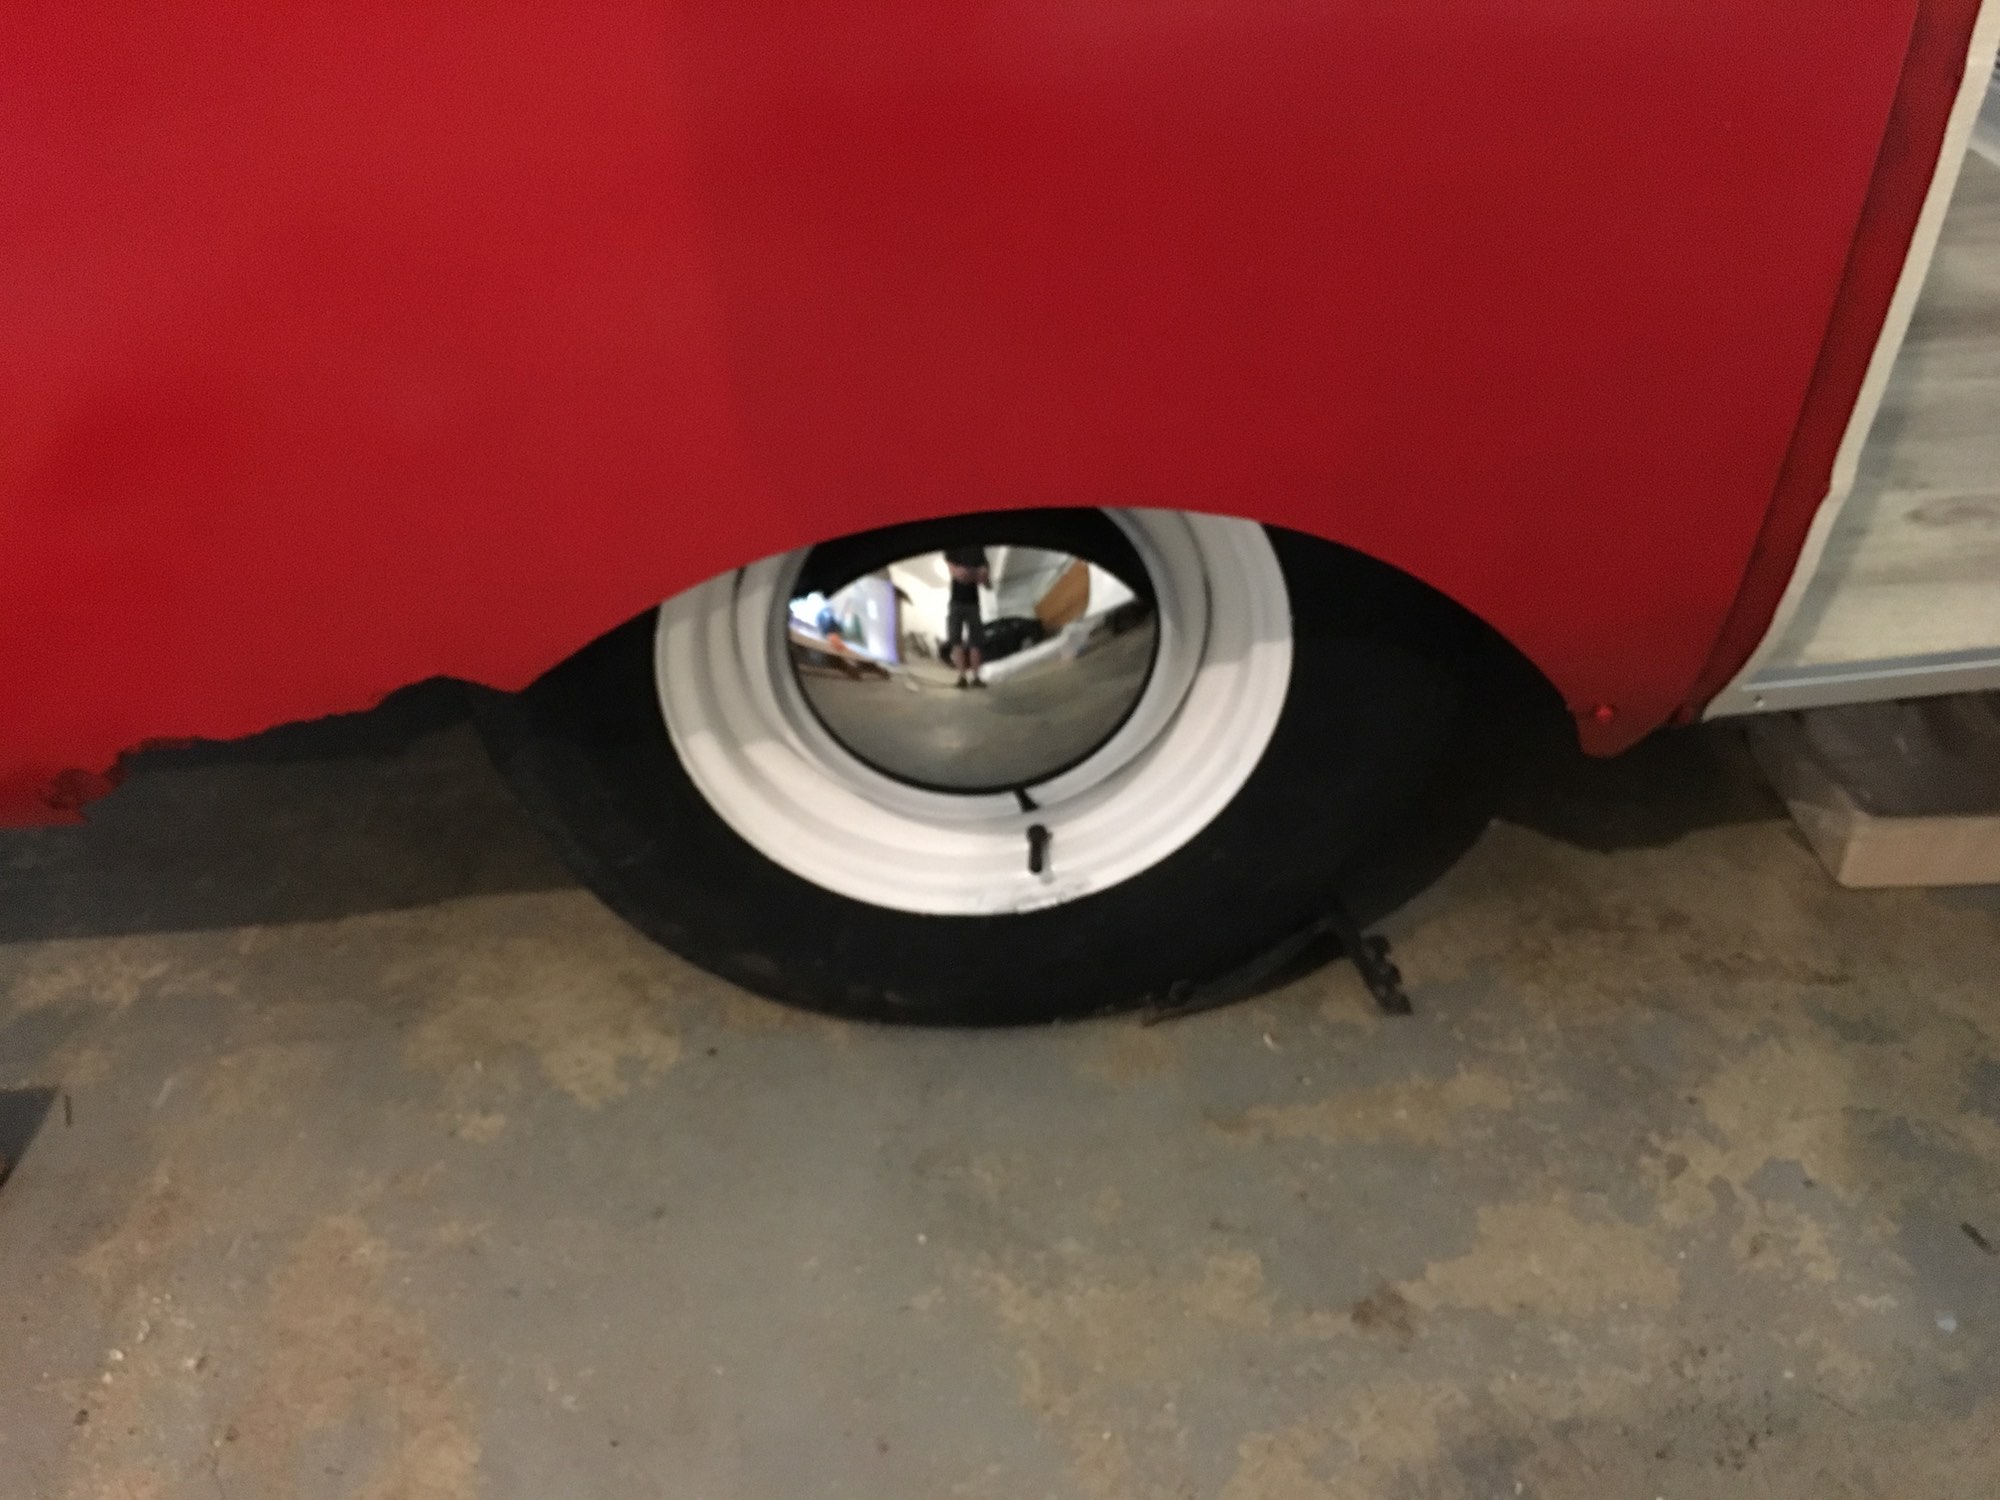 I painted the original wheels with Rustoleum white, too, and fitted some new baby moon hubcaps. You can also see some fiberglass damage from a long-ago blowout. Someday, when I get a pro paint job, I'll have that repaired. I did put new tires and bearings in, though.